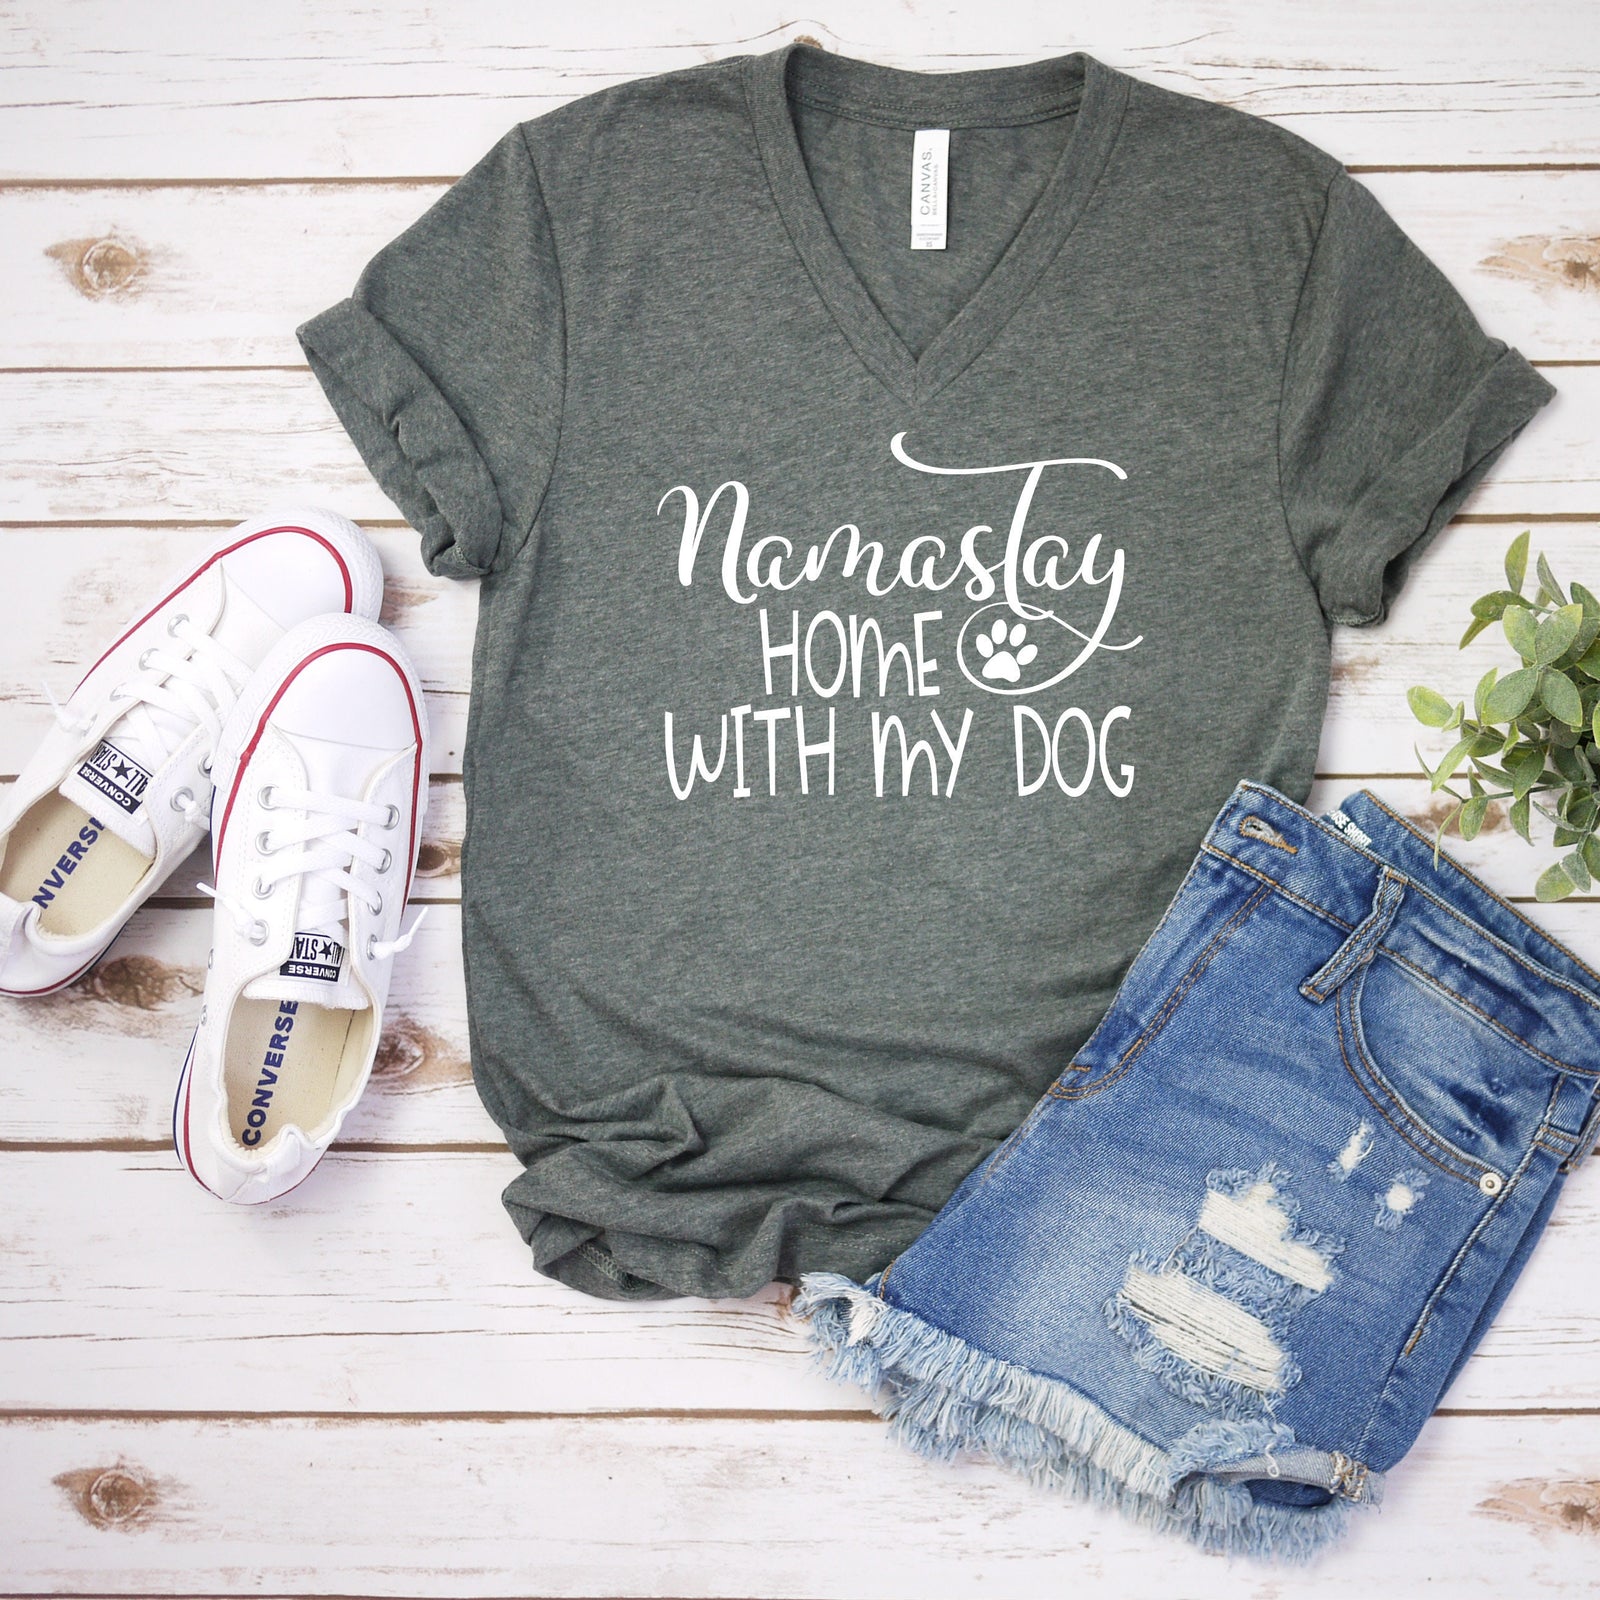 Namastay Home With My Dog T Shirt - Funny Dog Lover Shirt - Pet Rescue T Shirt - Dog Mom Shirt Gift - Funny Dog Lover Humor Shirt